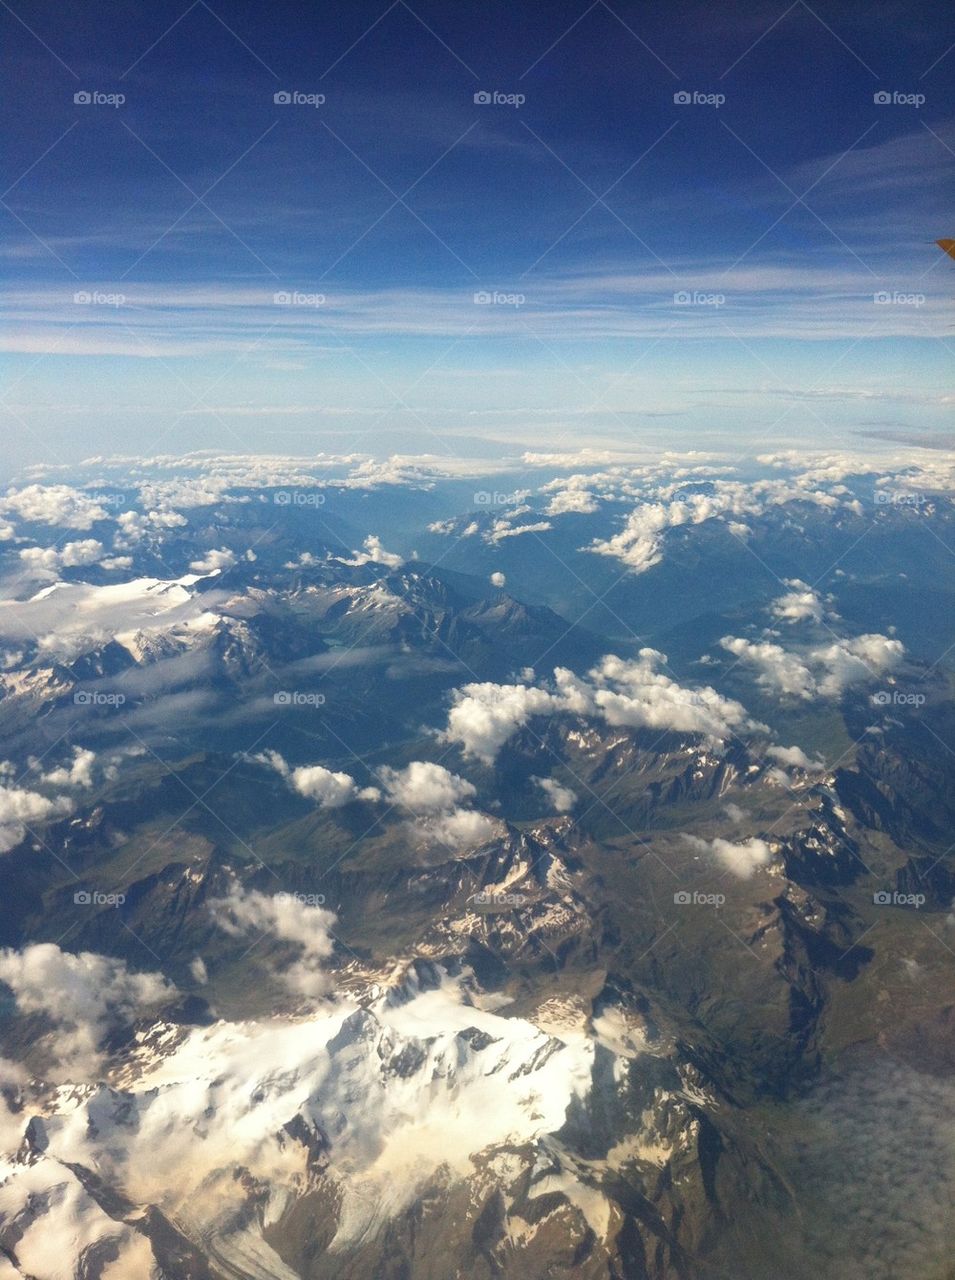 Over the alps